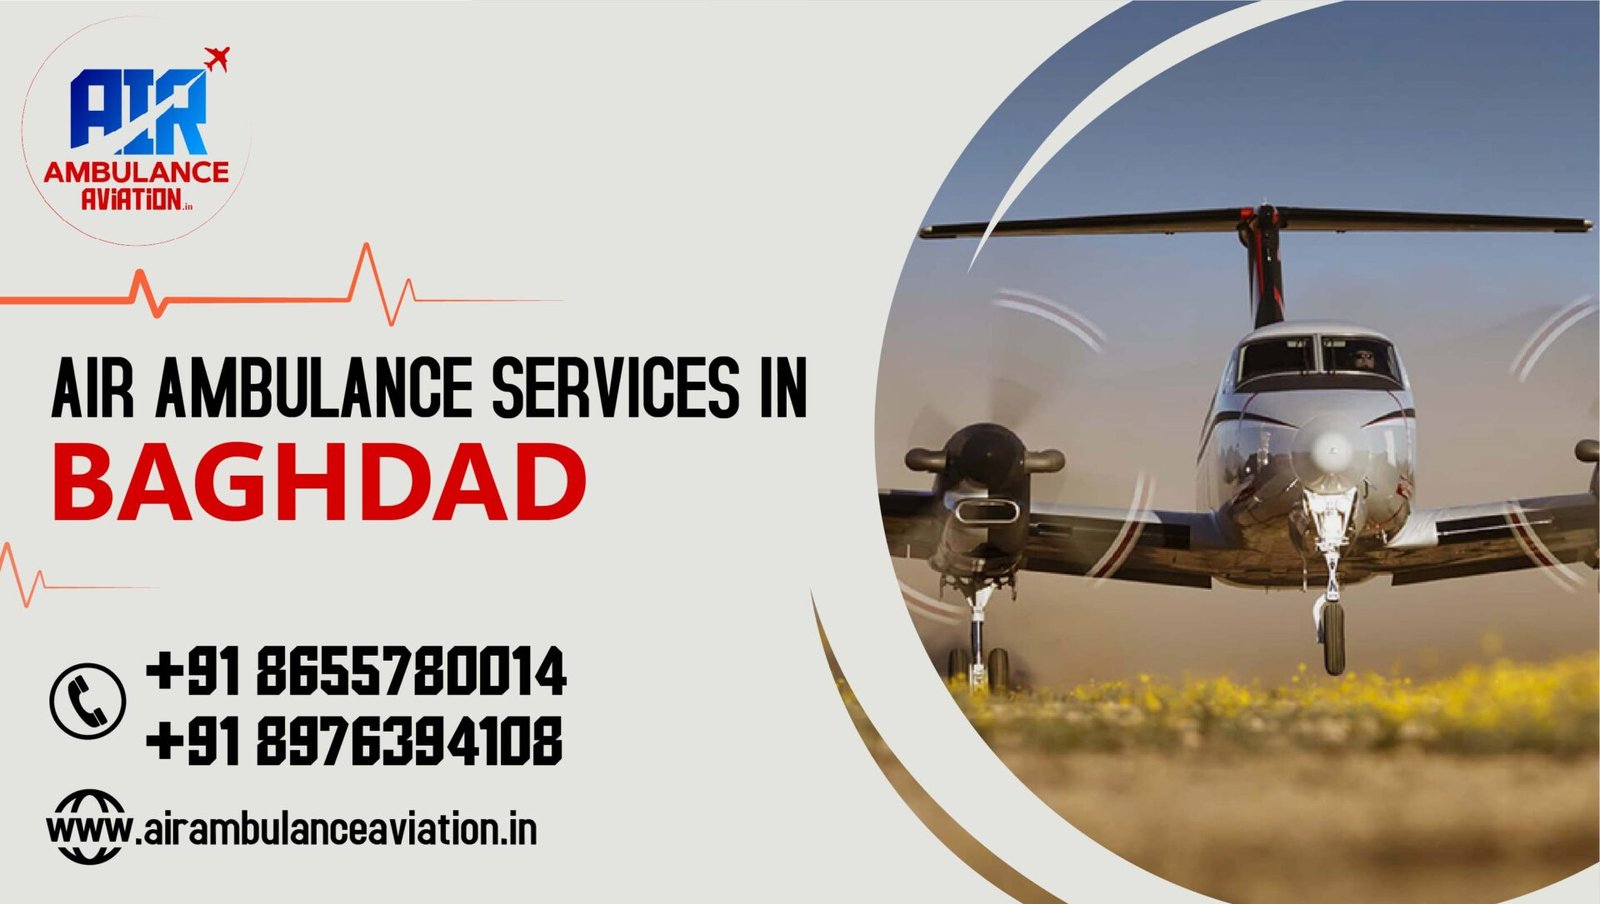 Air Ambulance services in Baghdad